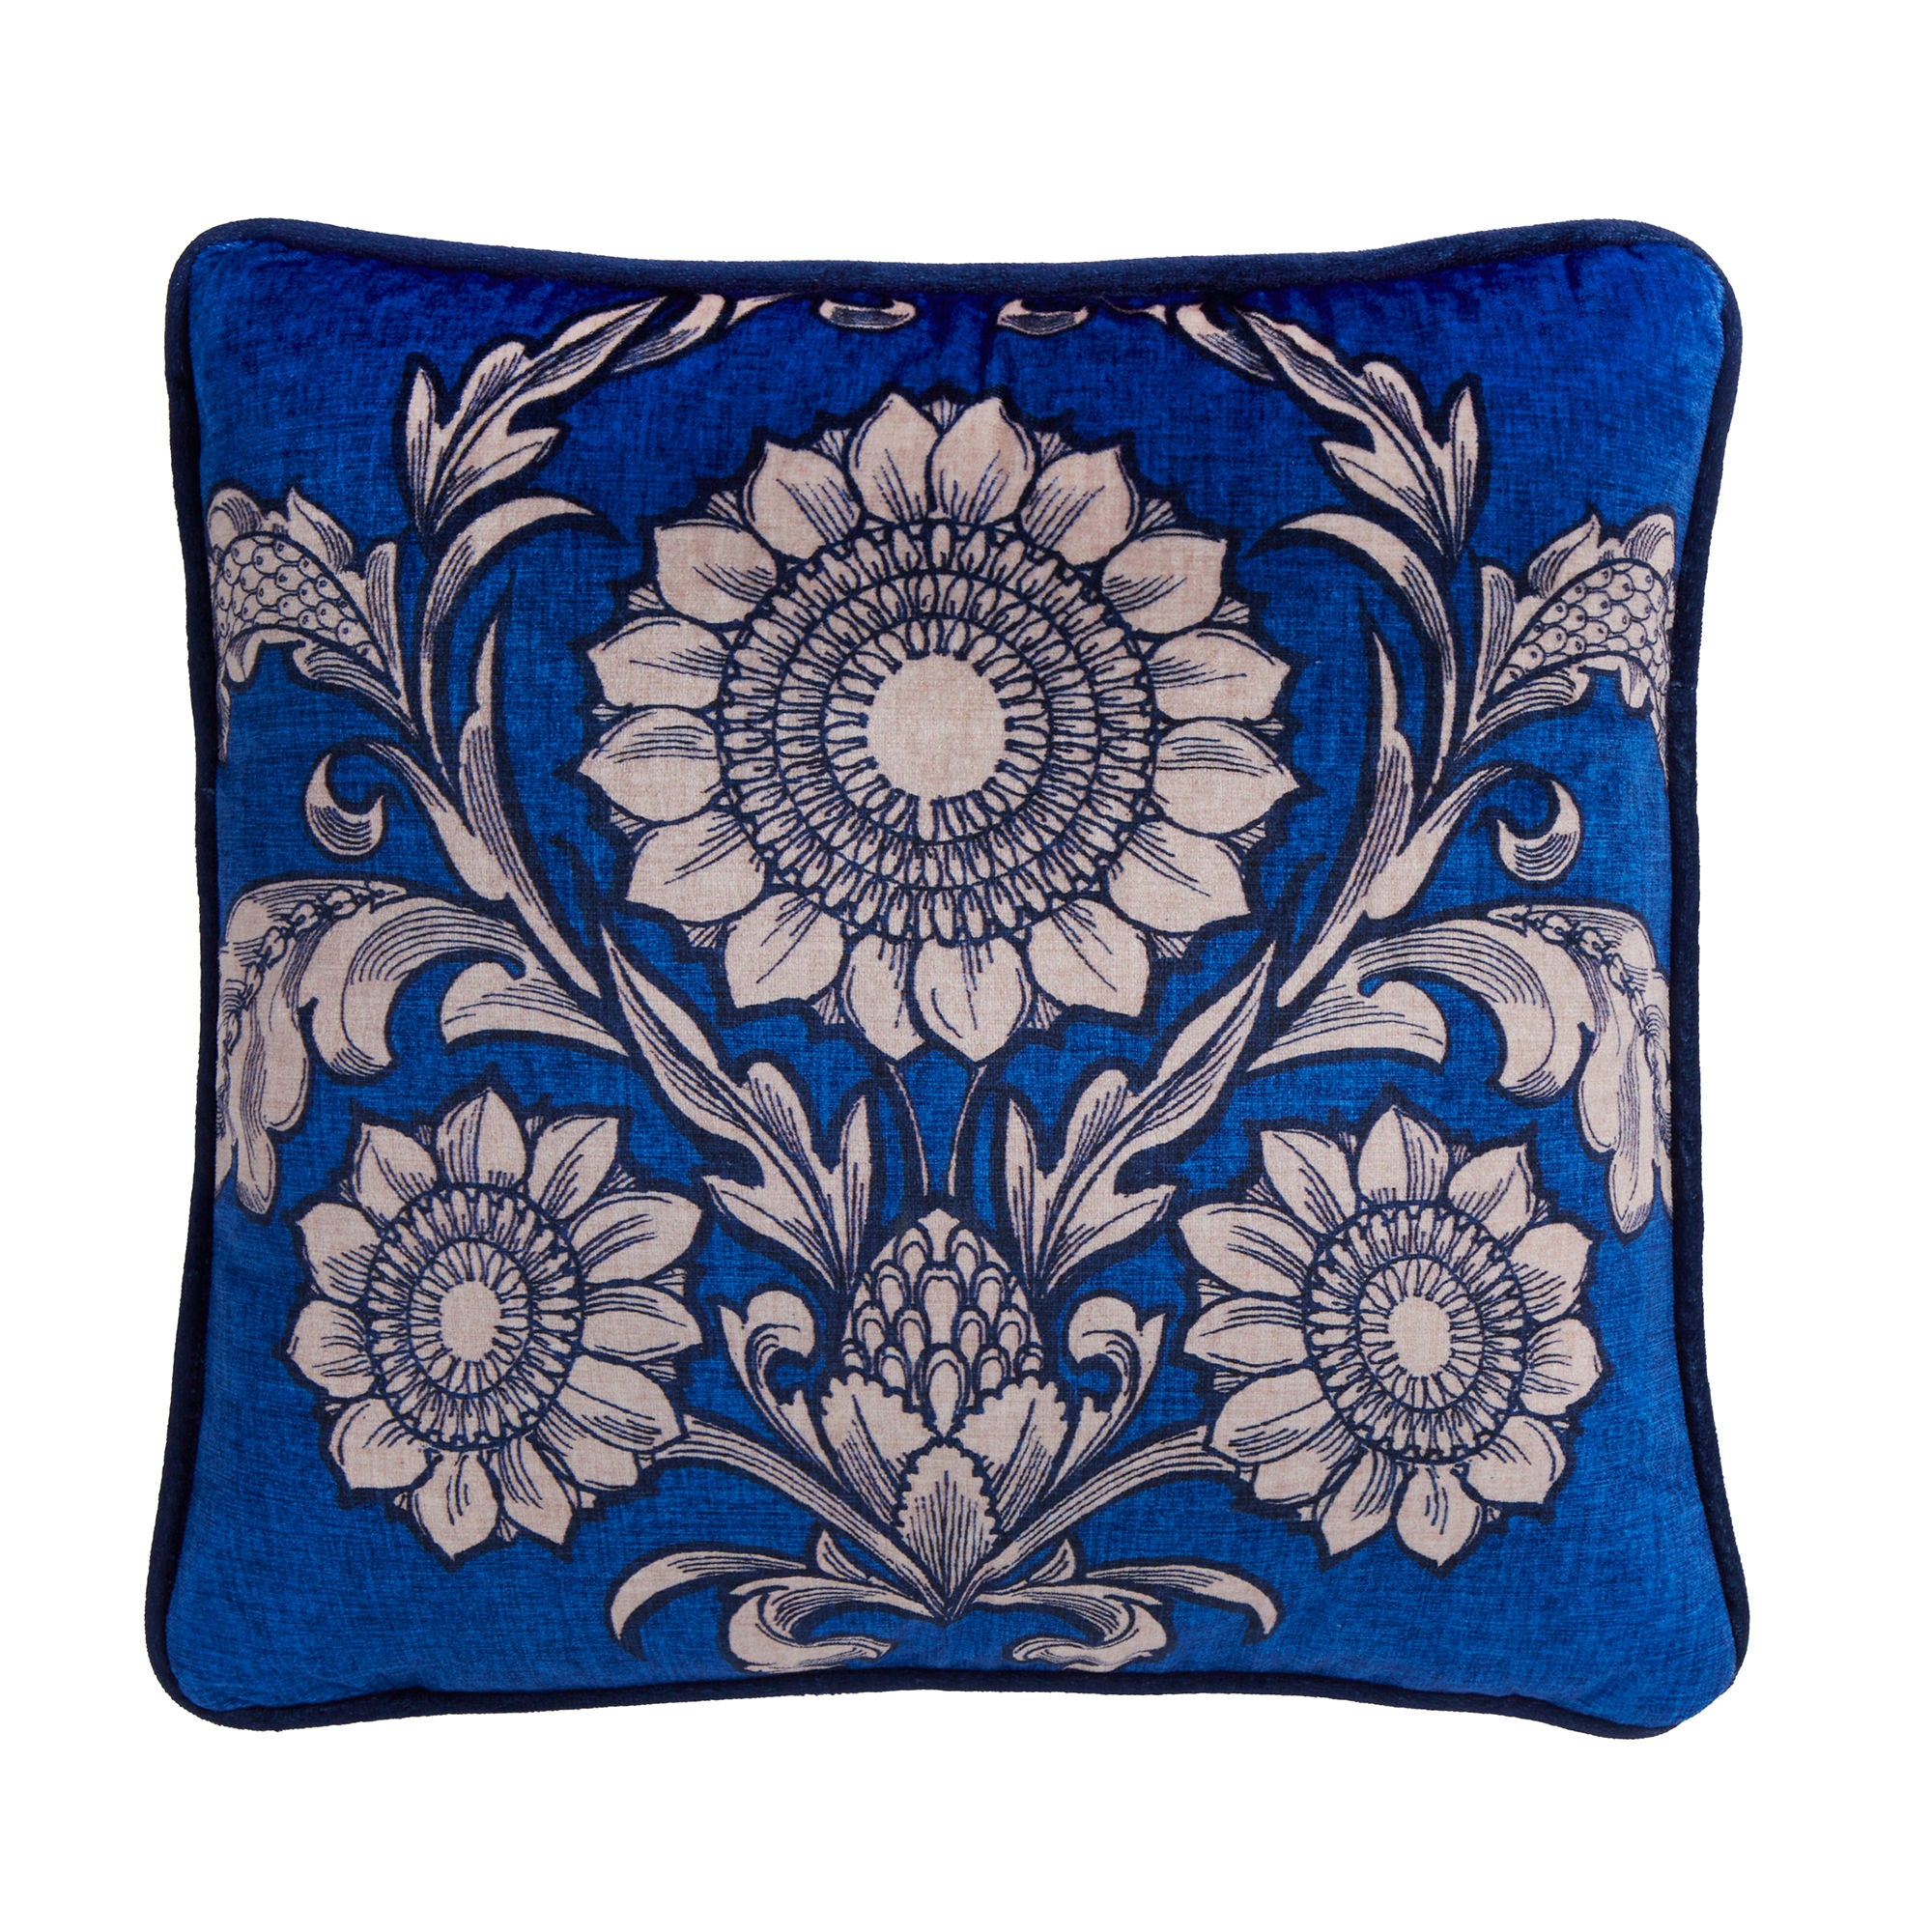 Romilly Cushion by Laurence Llewelyn-Bowen in Blue 43 x 43cm - Cushion - Laurence Llewelyn-Bowen